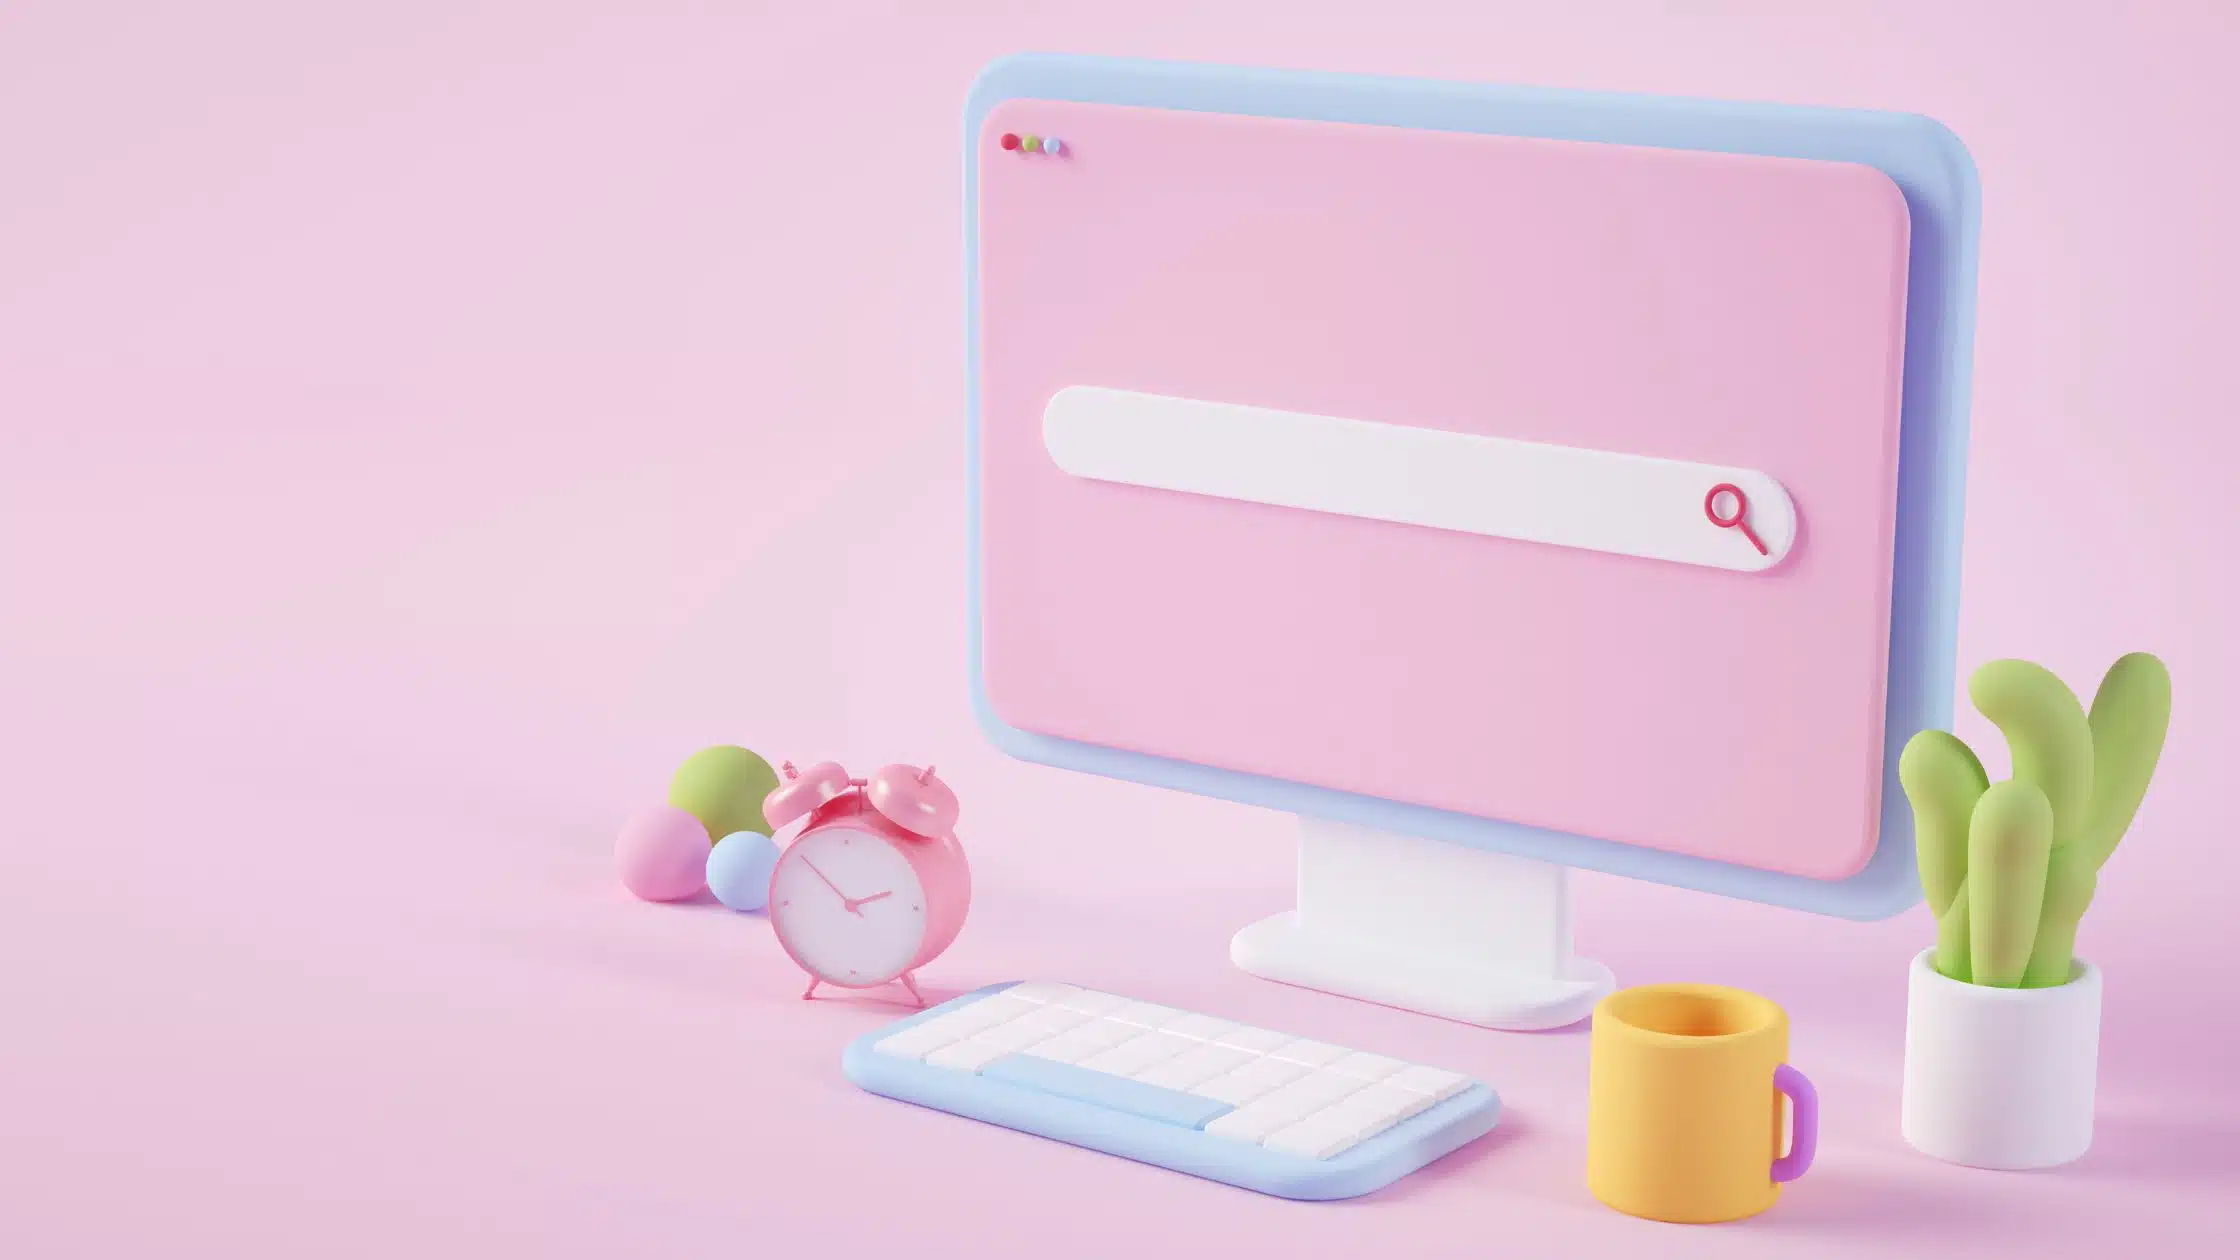 SEO Mistakes - AI created image of a desk and workplace in a pink colour palette